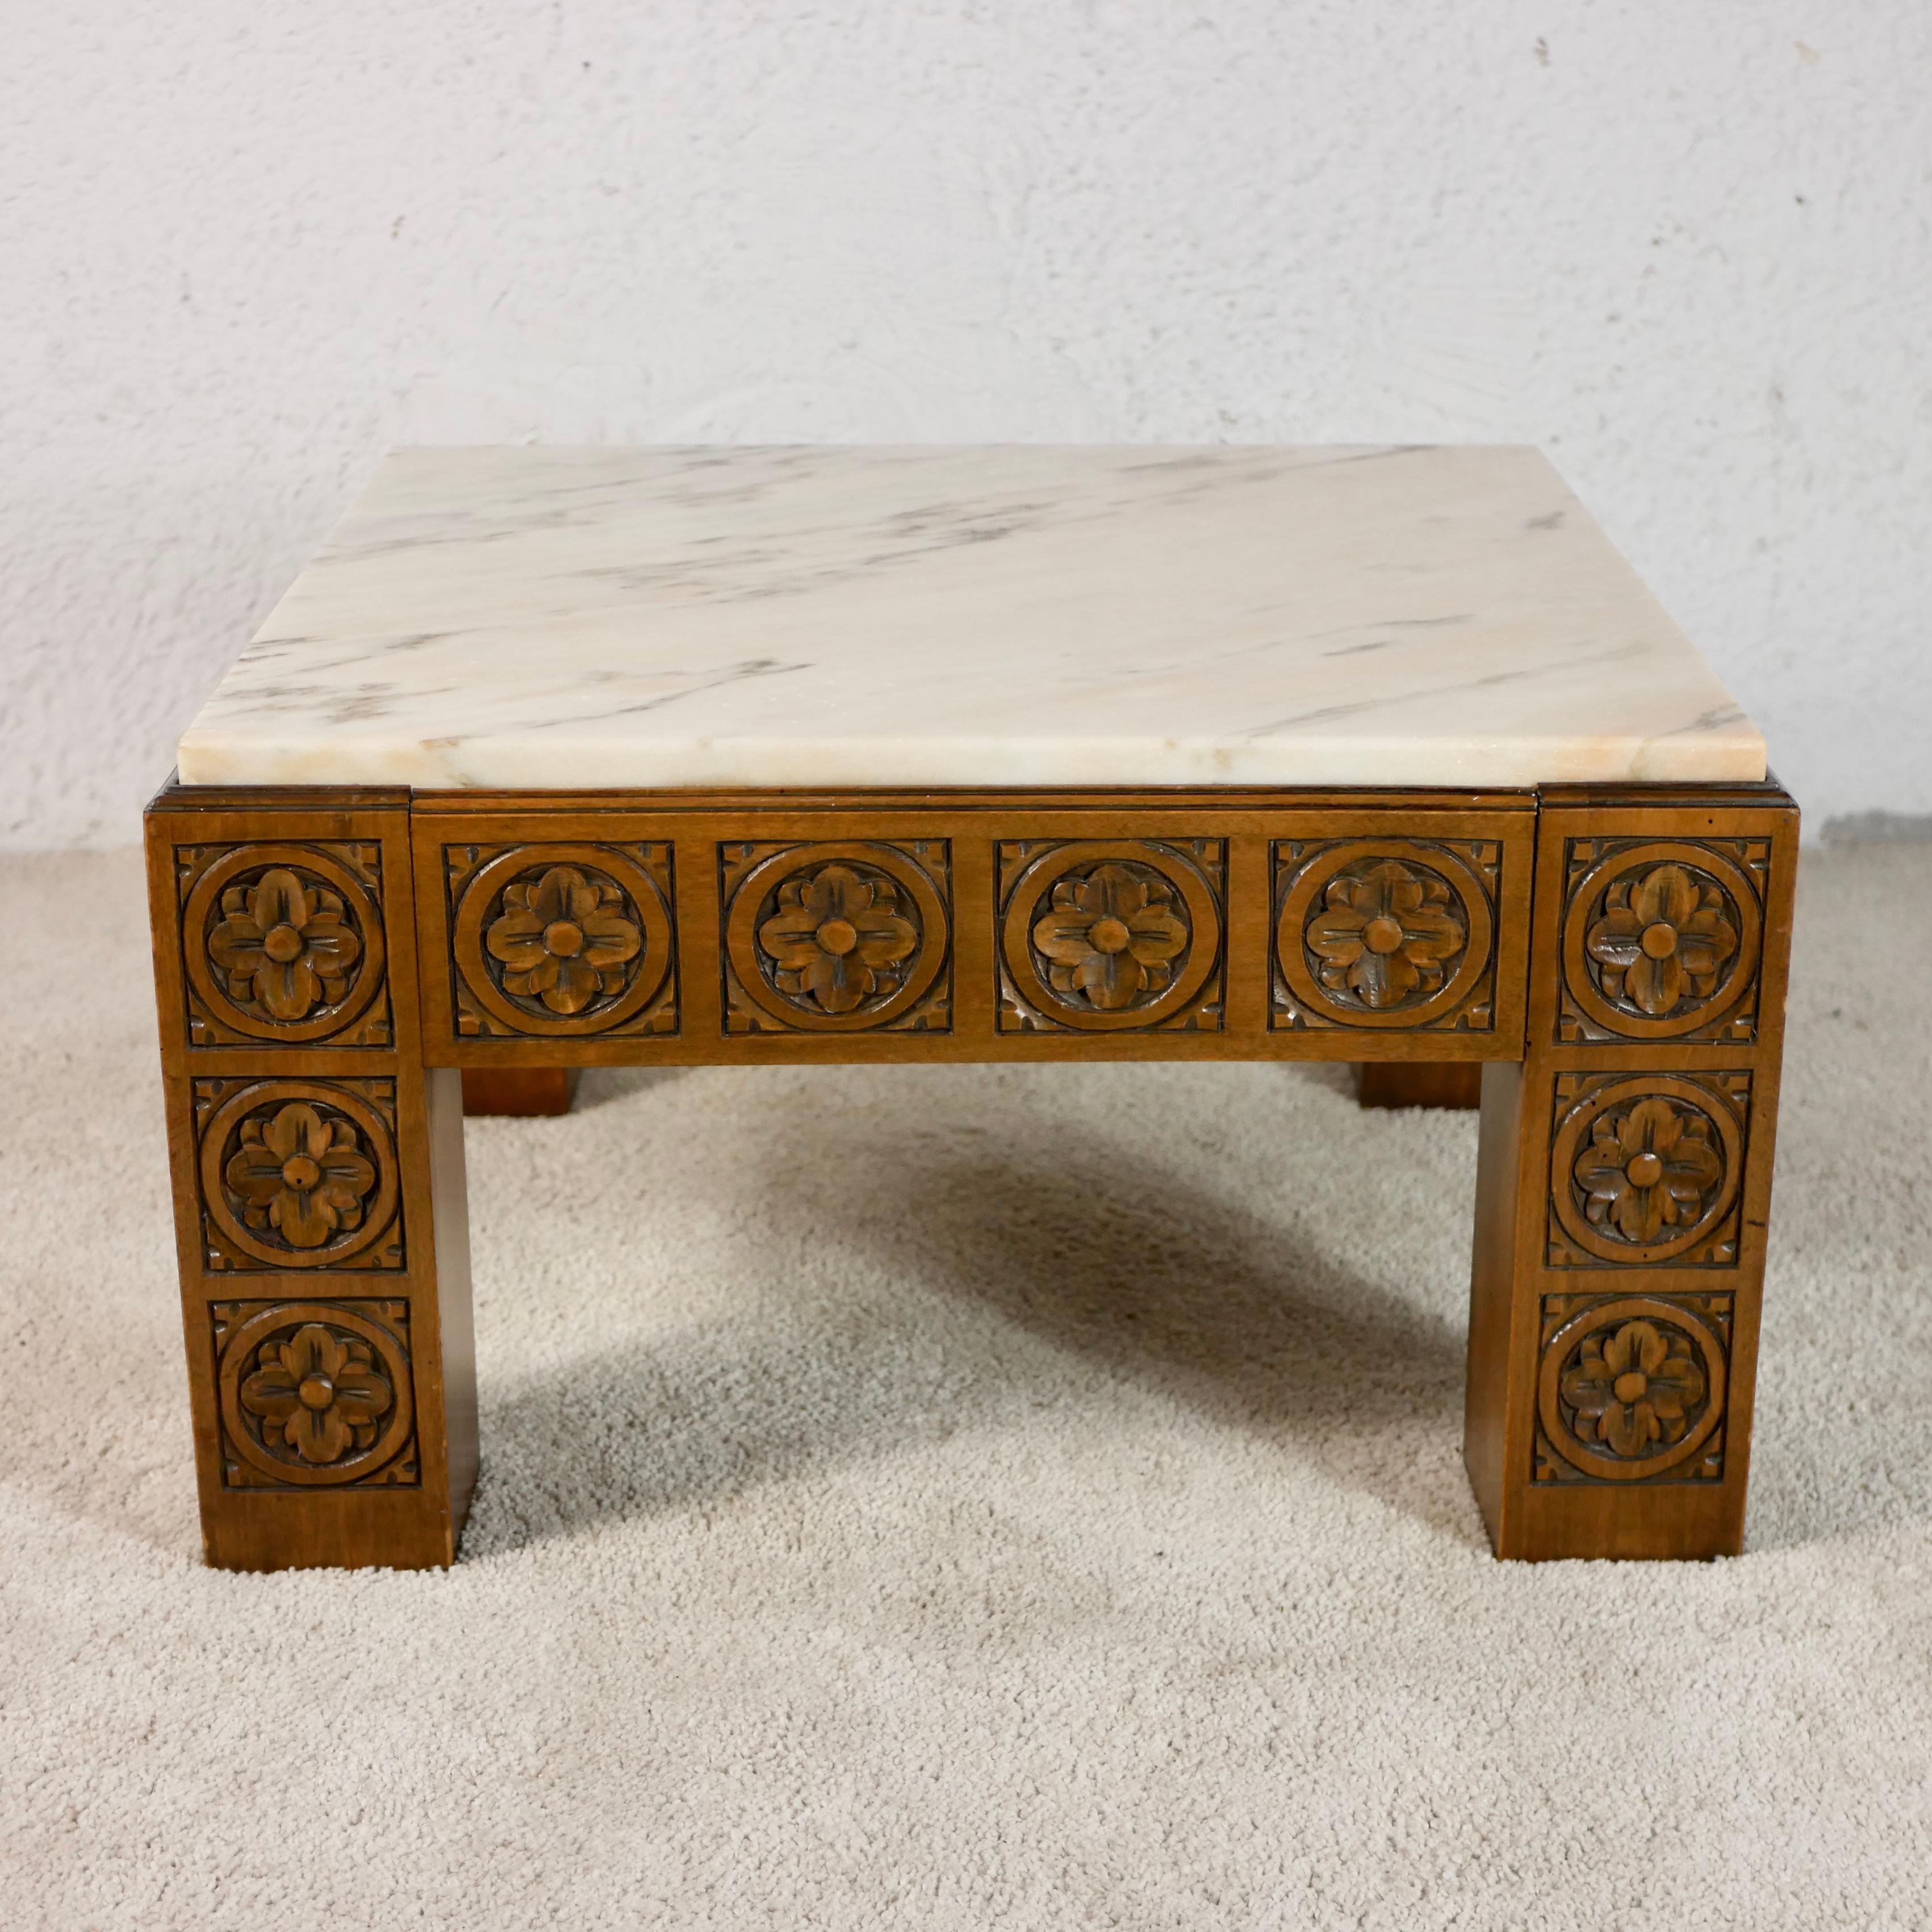 20th Century Midcentury Square Carved Wood and Marble Coffee Table from Spain